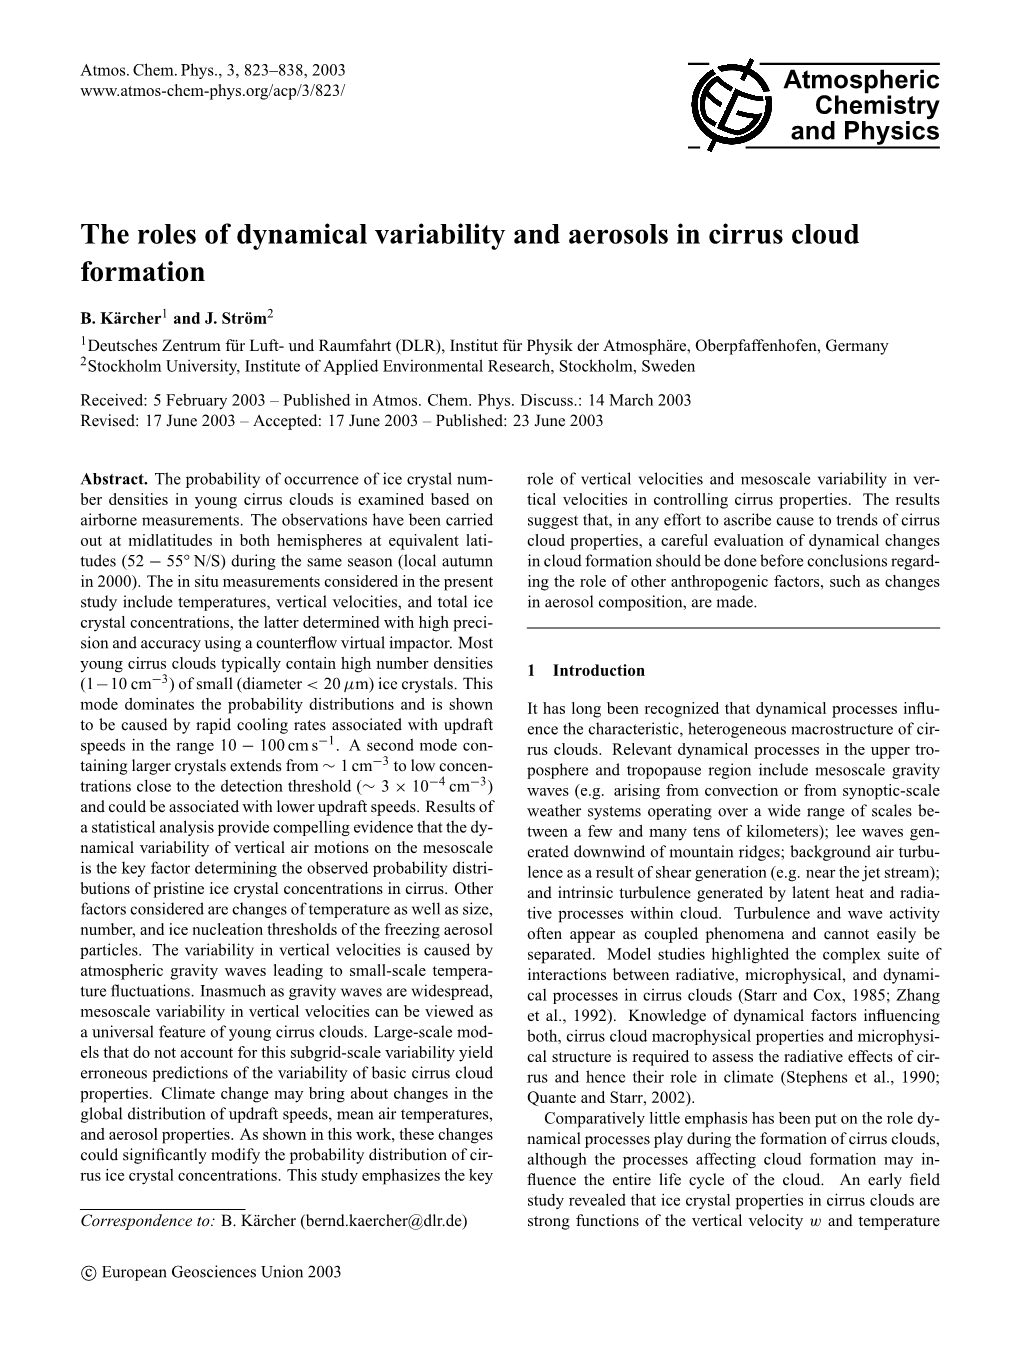 The Roles of Dynamical Variability and Aerosols in Cirrus Cloud Formation